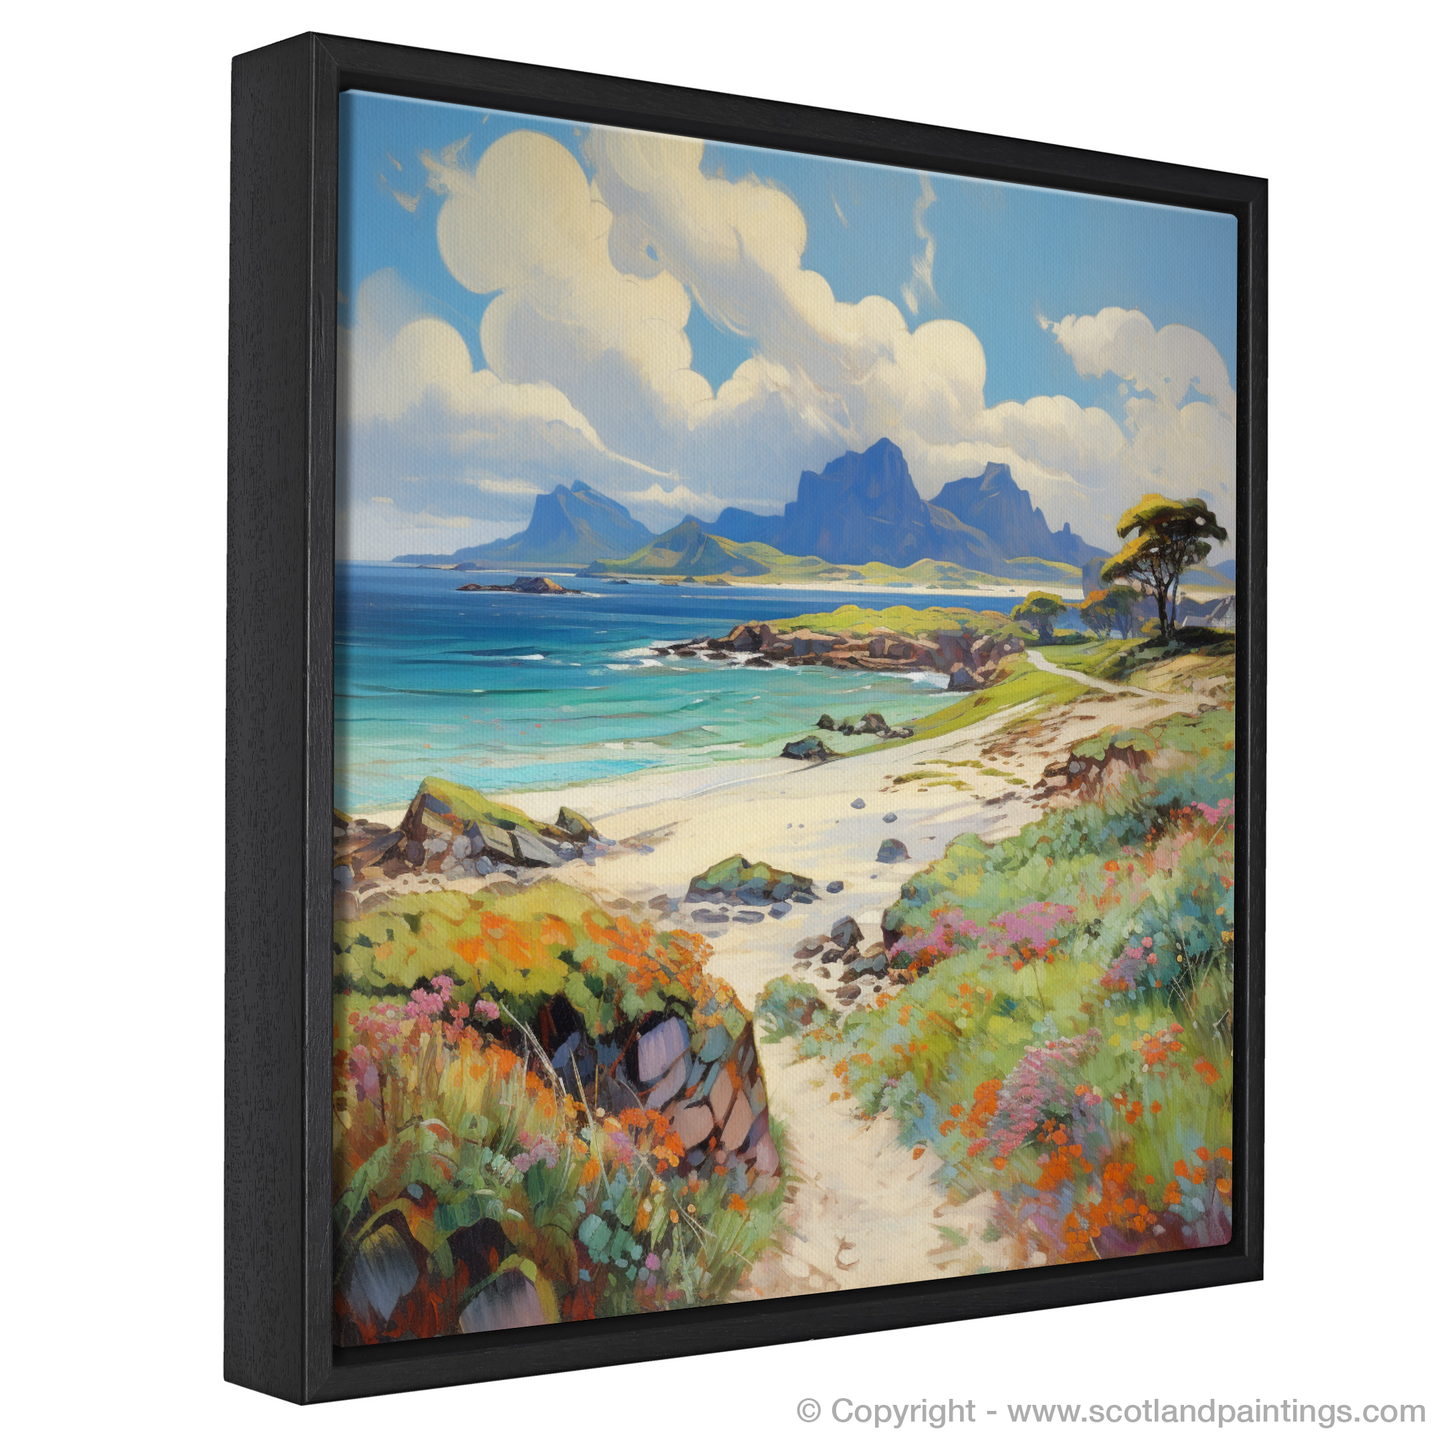 Painting and Art Print of Isle of Eigg, Inner Hebrides in summer entitled "Summer Serenade on the Isle of Eigg".